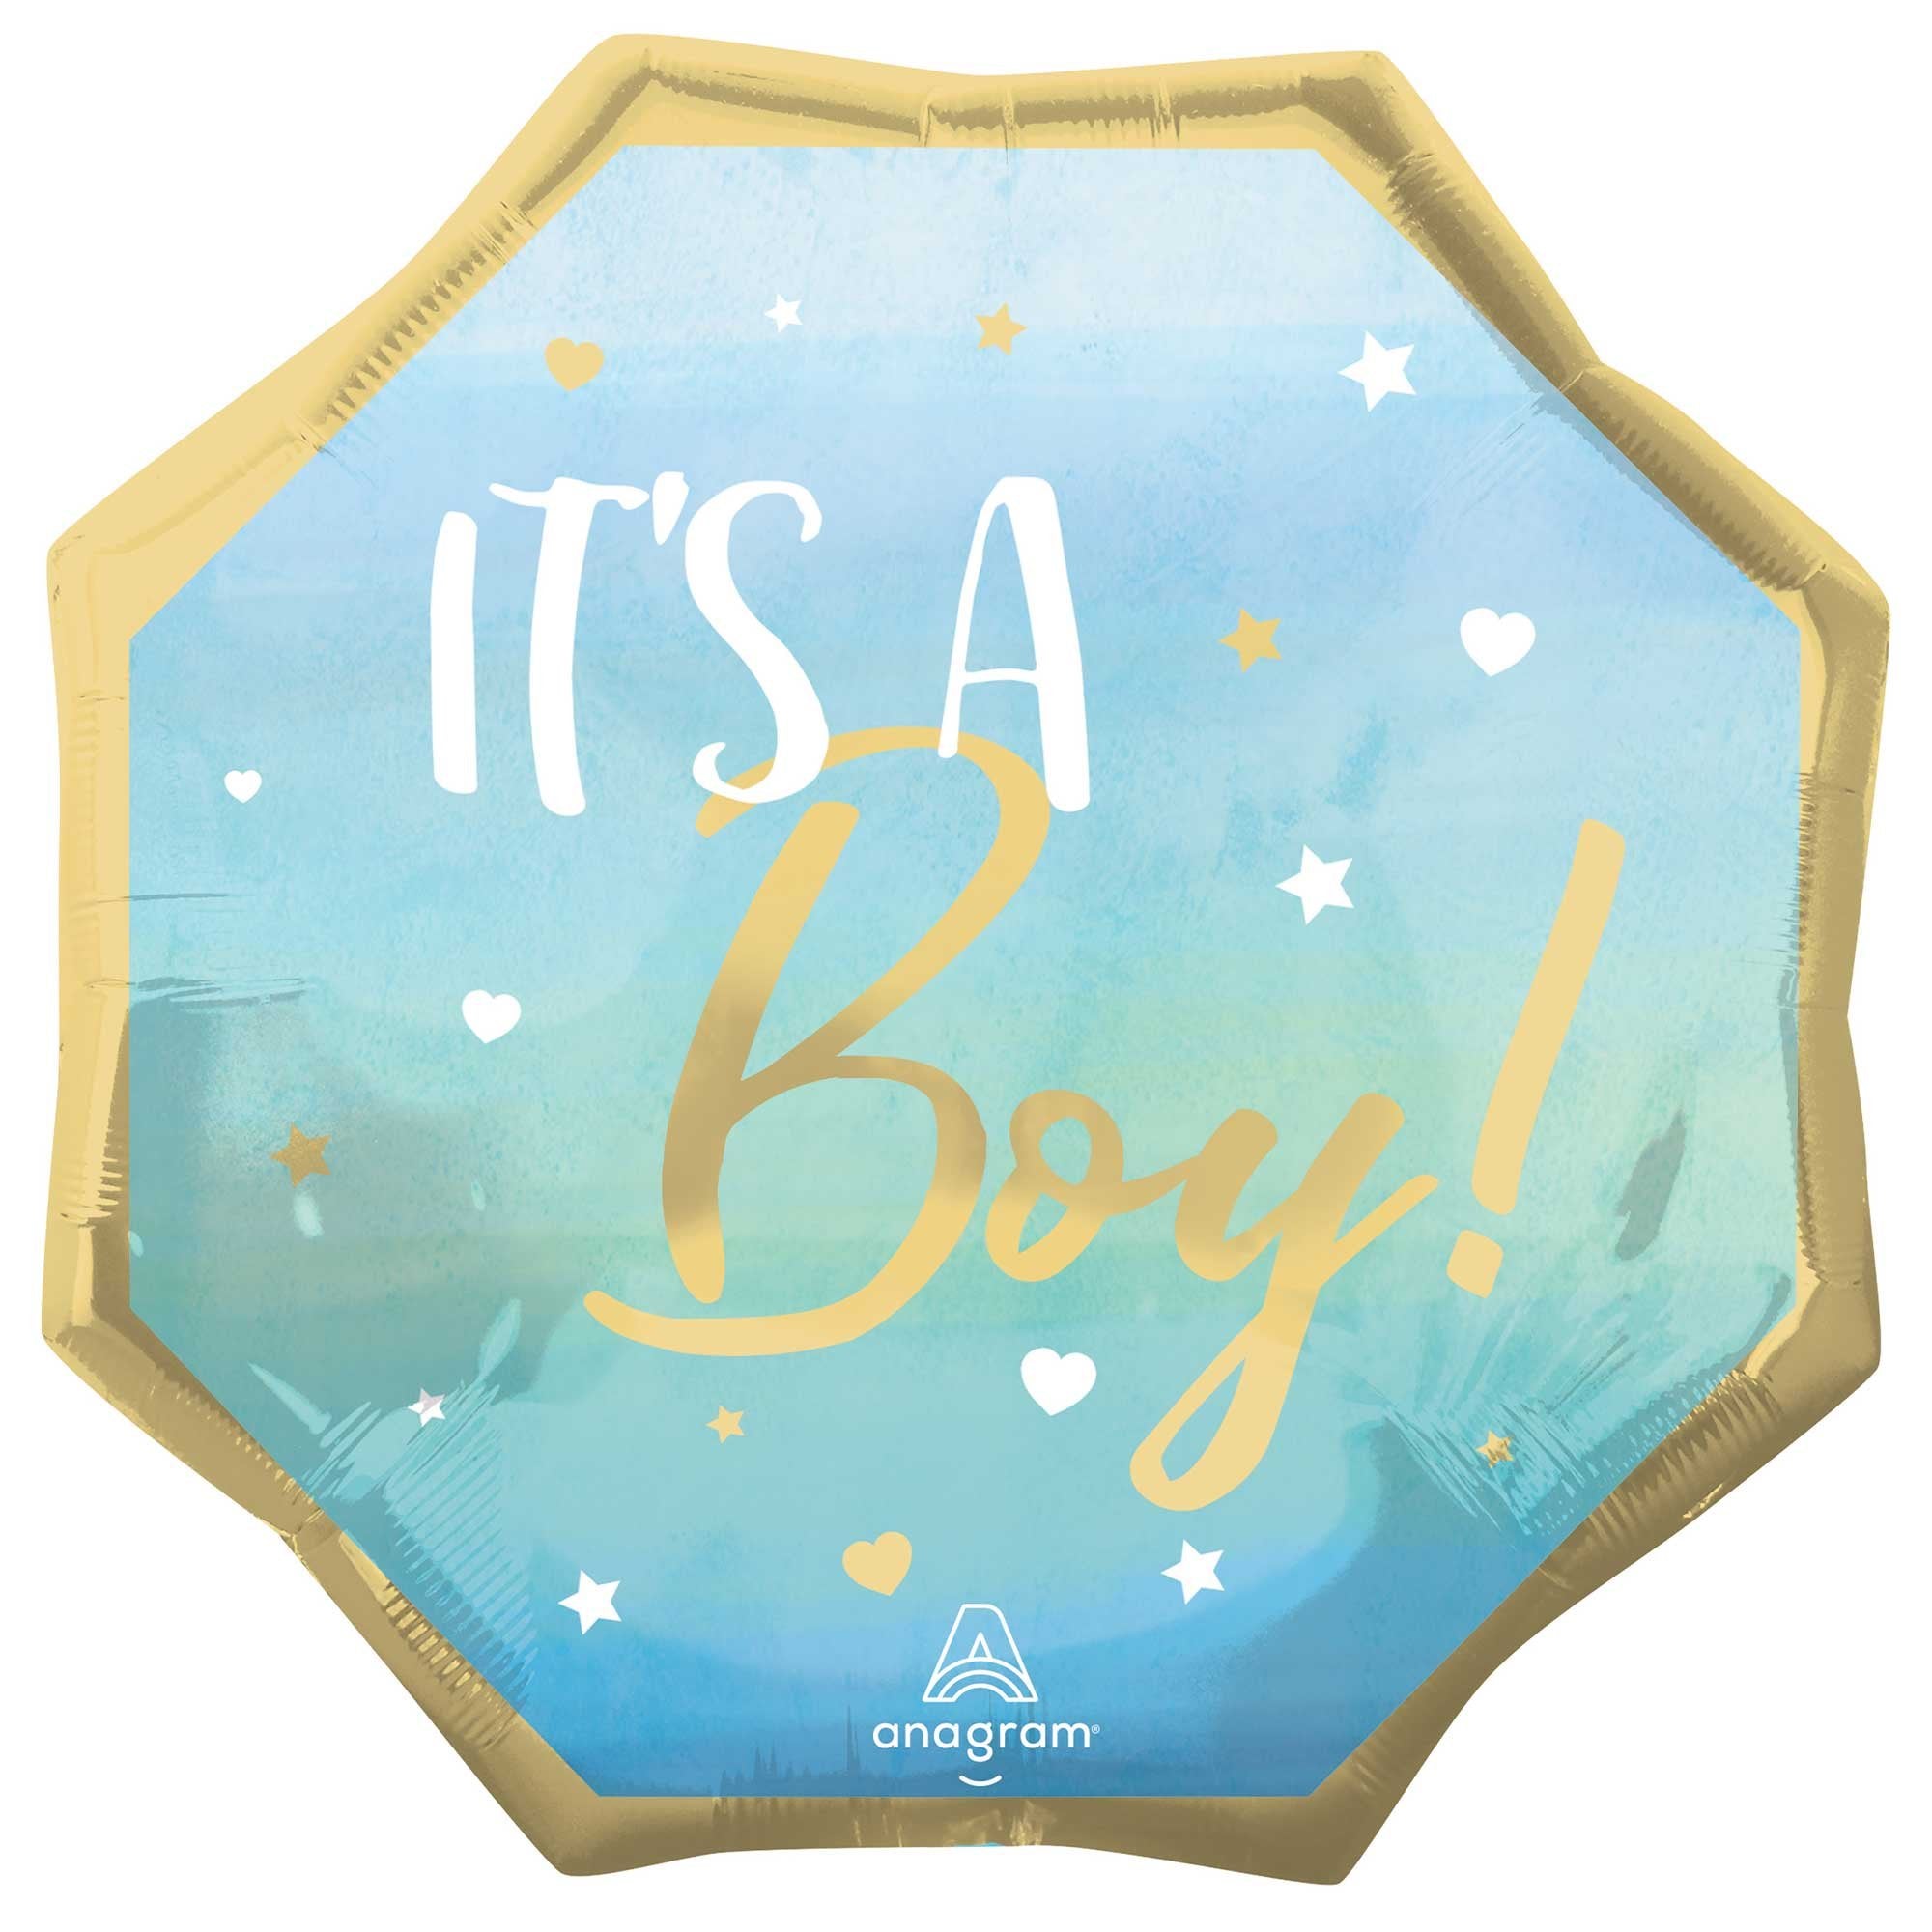 Party Empress' Welcome Baby Boy collection offers themed decor that you can incorporate into the celebration to create a warm and charming atmosphere for the new arrival of a baby boy. 